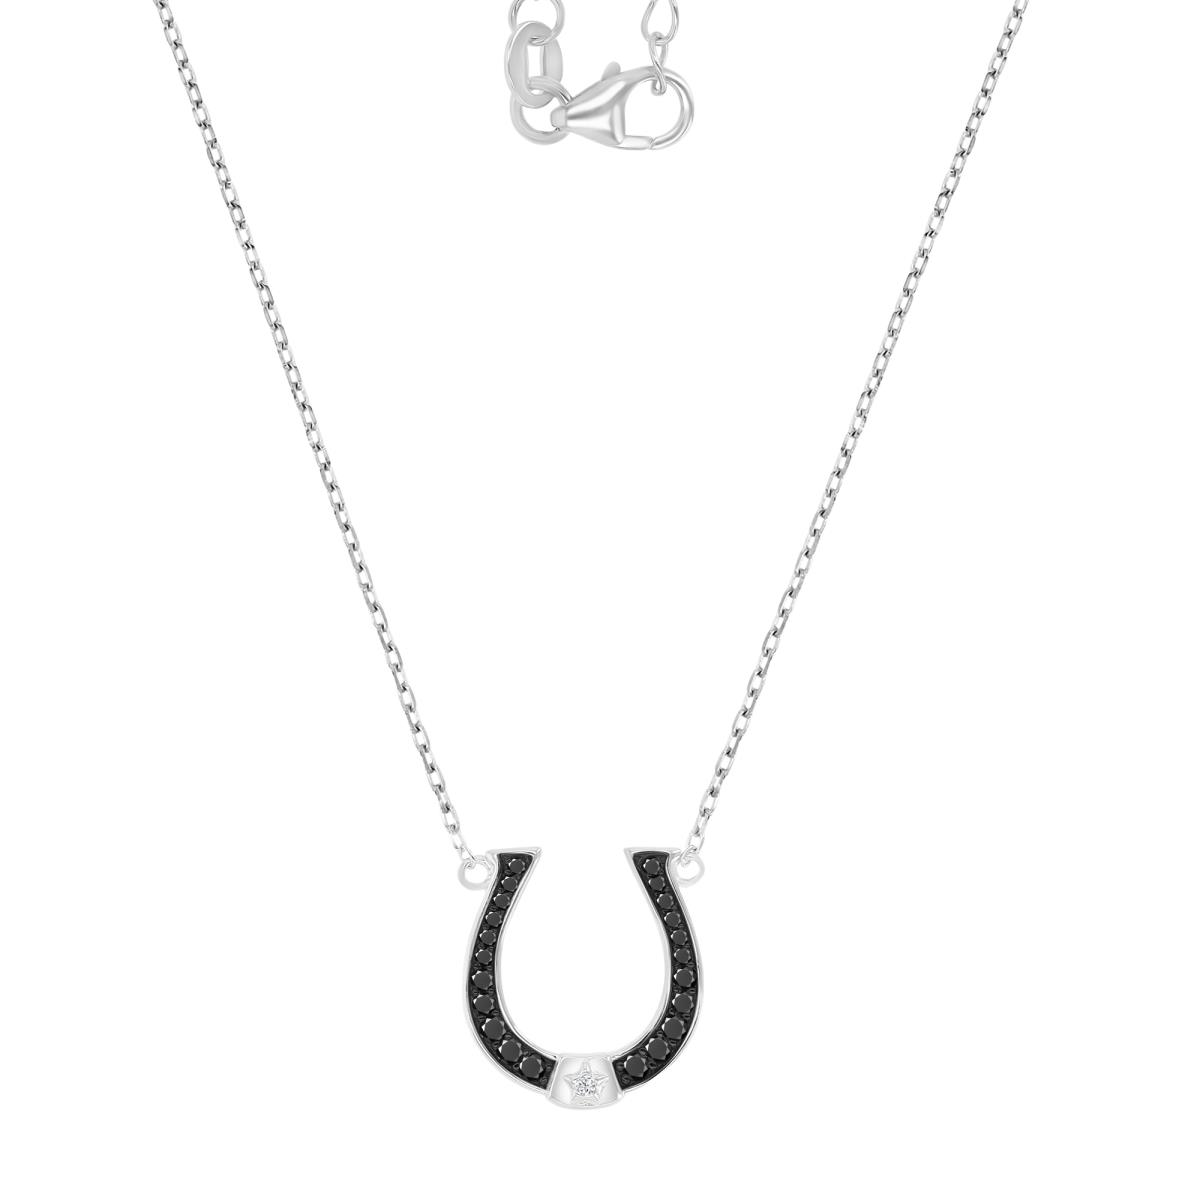 Sterling Silver Black & White 15X14MM Polished Black Spinel & White CZ Horse Shoe Star 18+2" Necklace